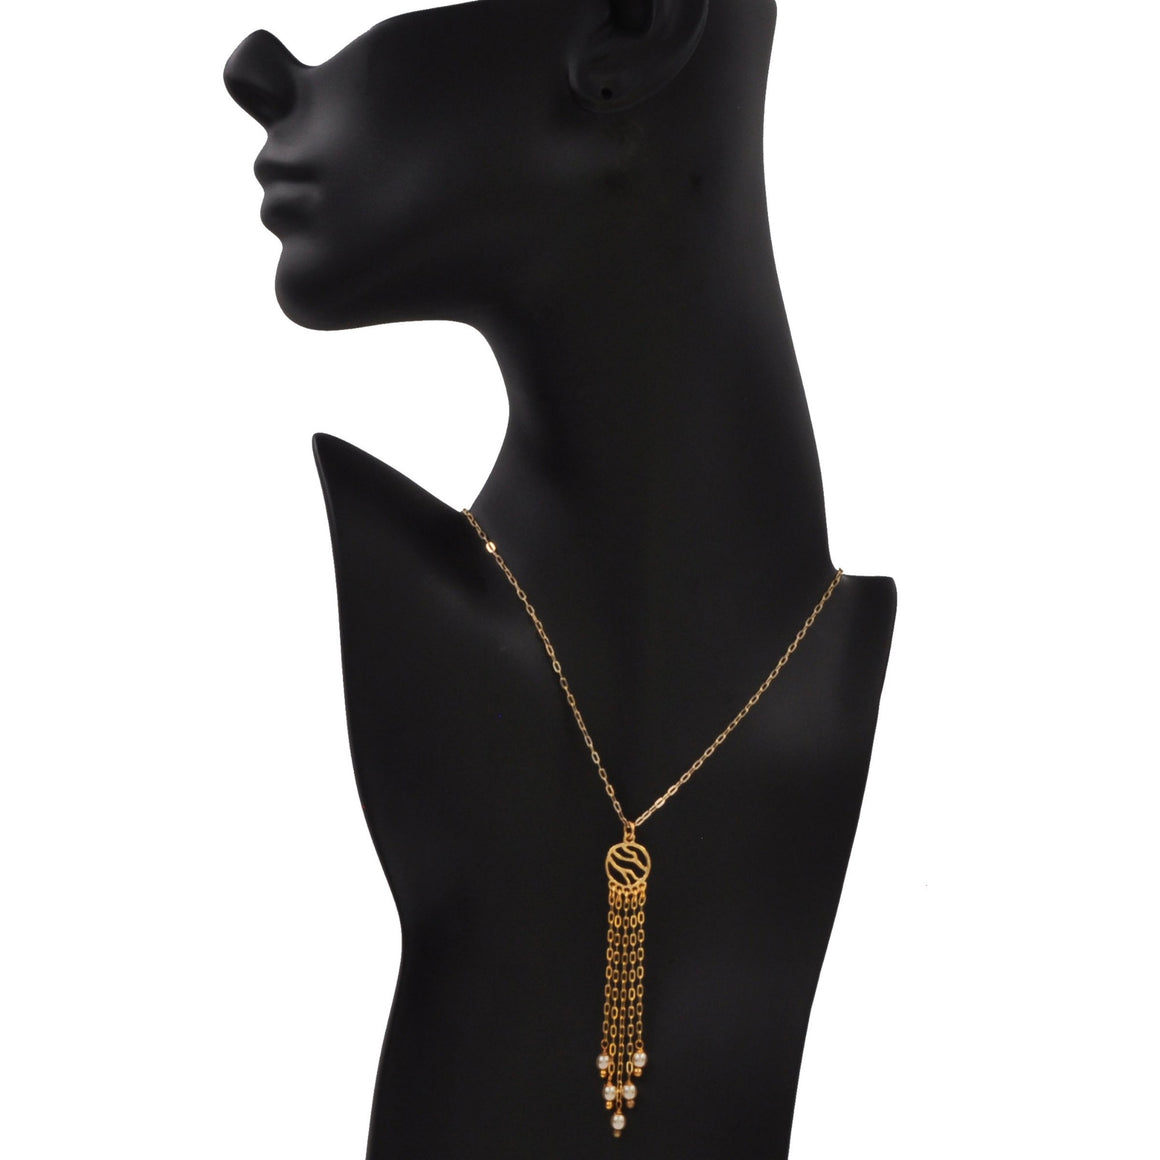 Glamorous Fringe Circle Necklace with Pearls - 24K Gold Plated